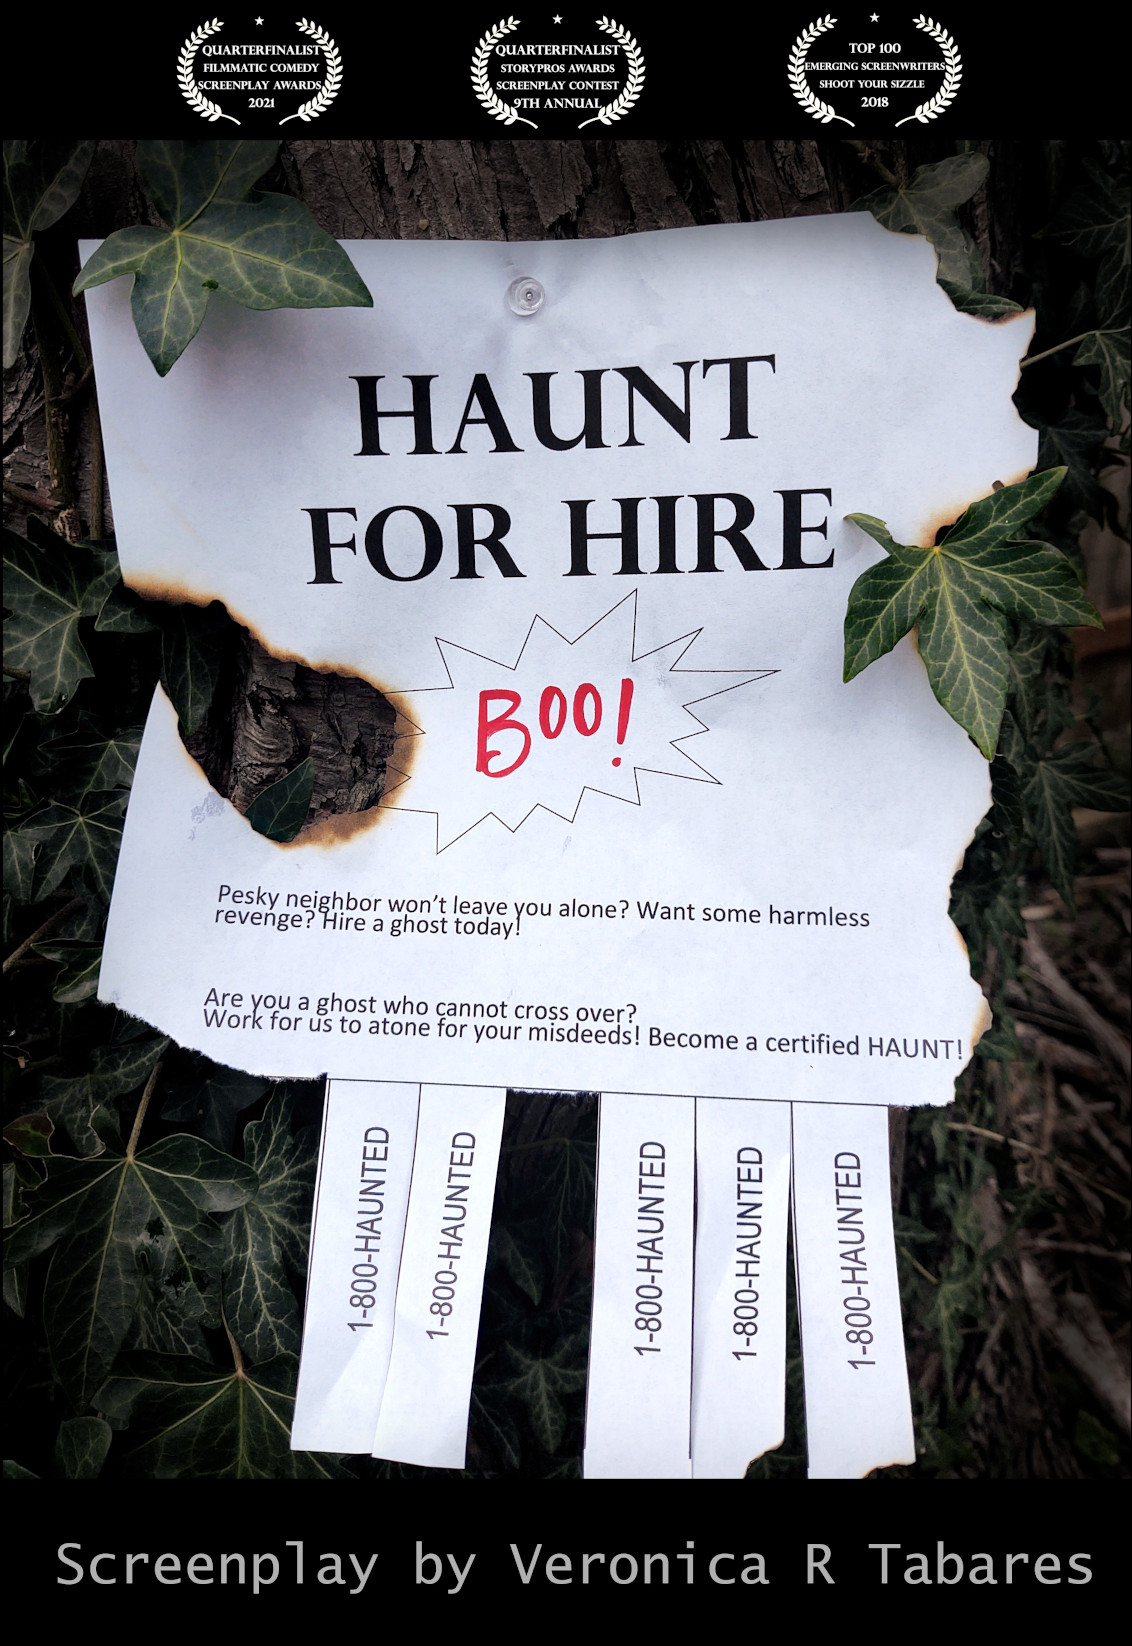 HAUNT FOR HIRE